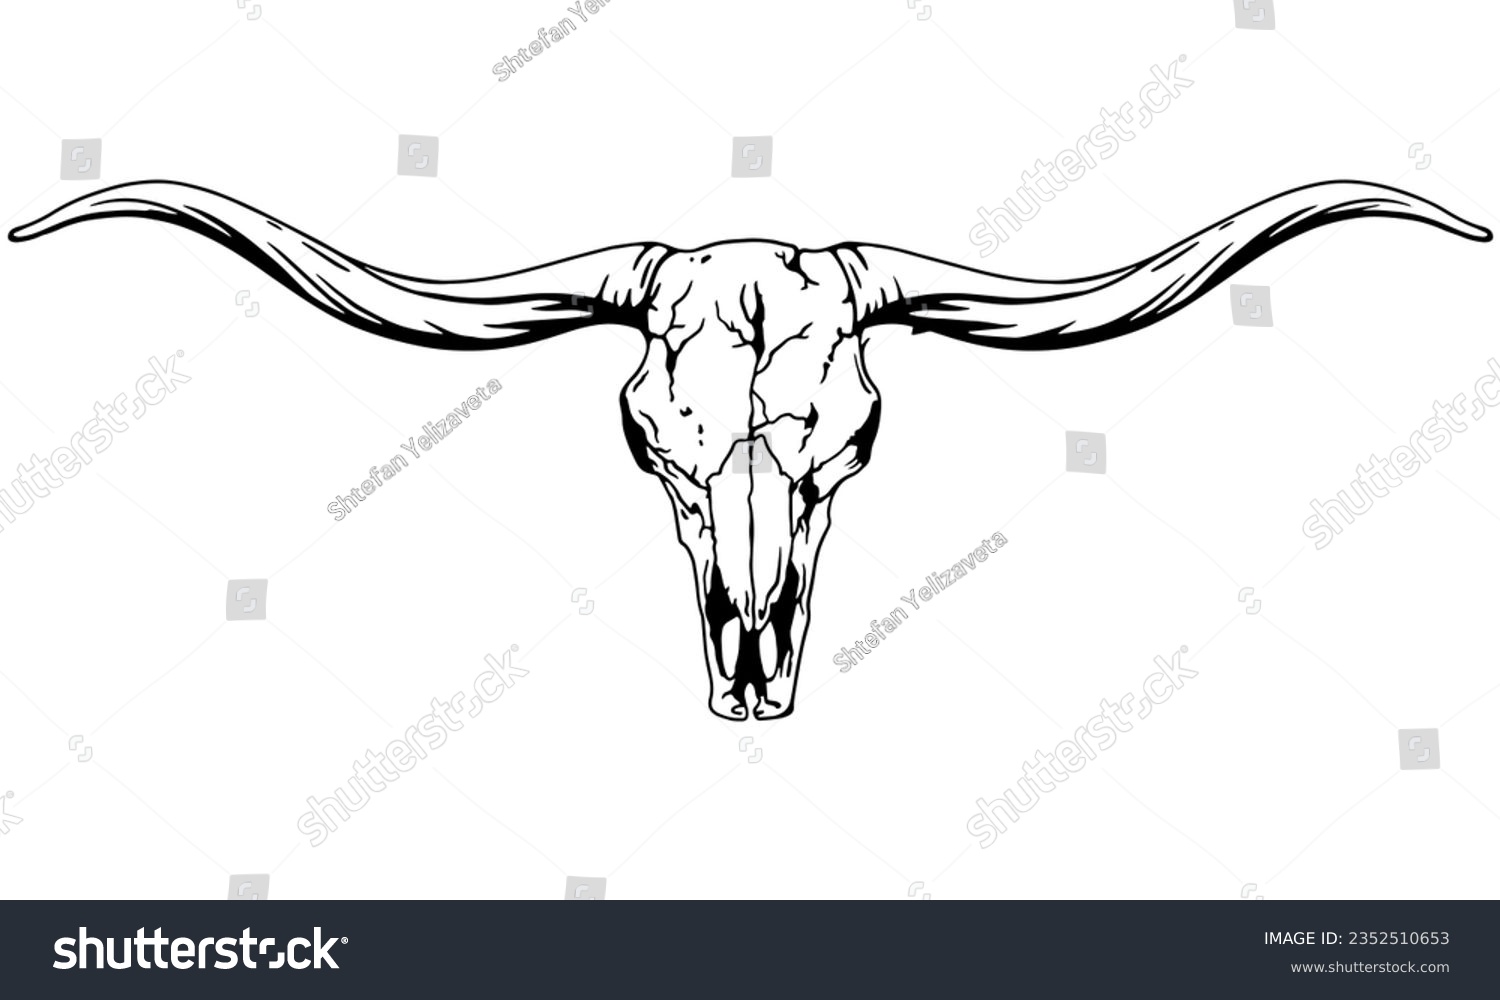 SVG of Texas Longhorn, Country Western Bull Cattle Vintage Label Logo Design. Vector hand drawing of the head of a Texas longhorn on a white backgroundf svg